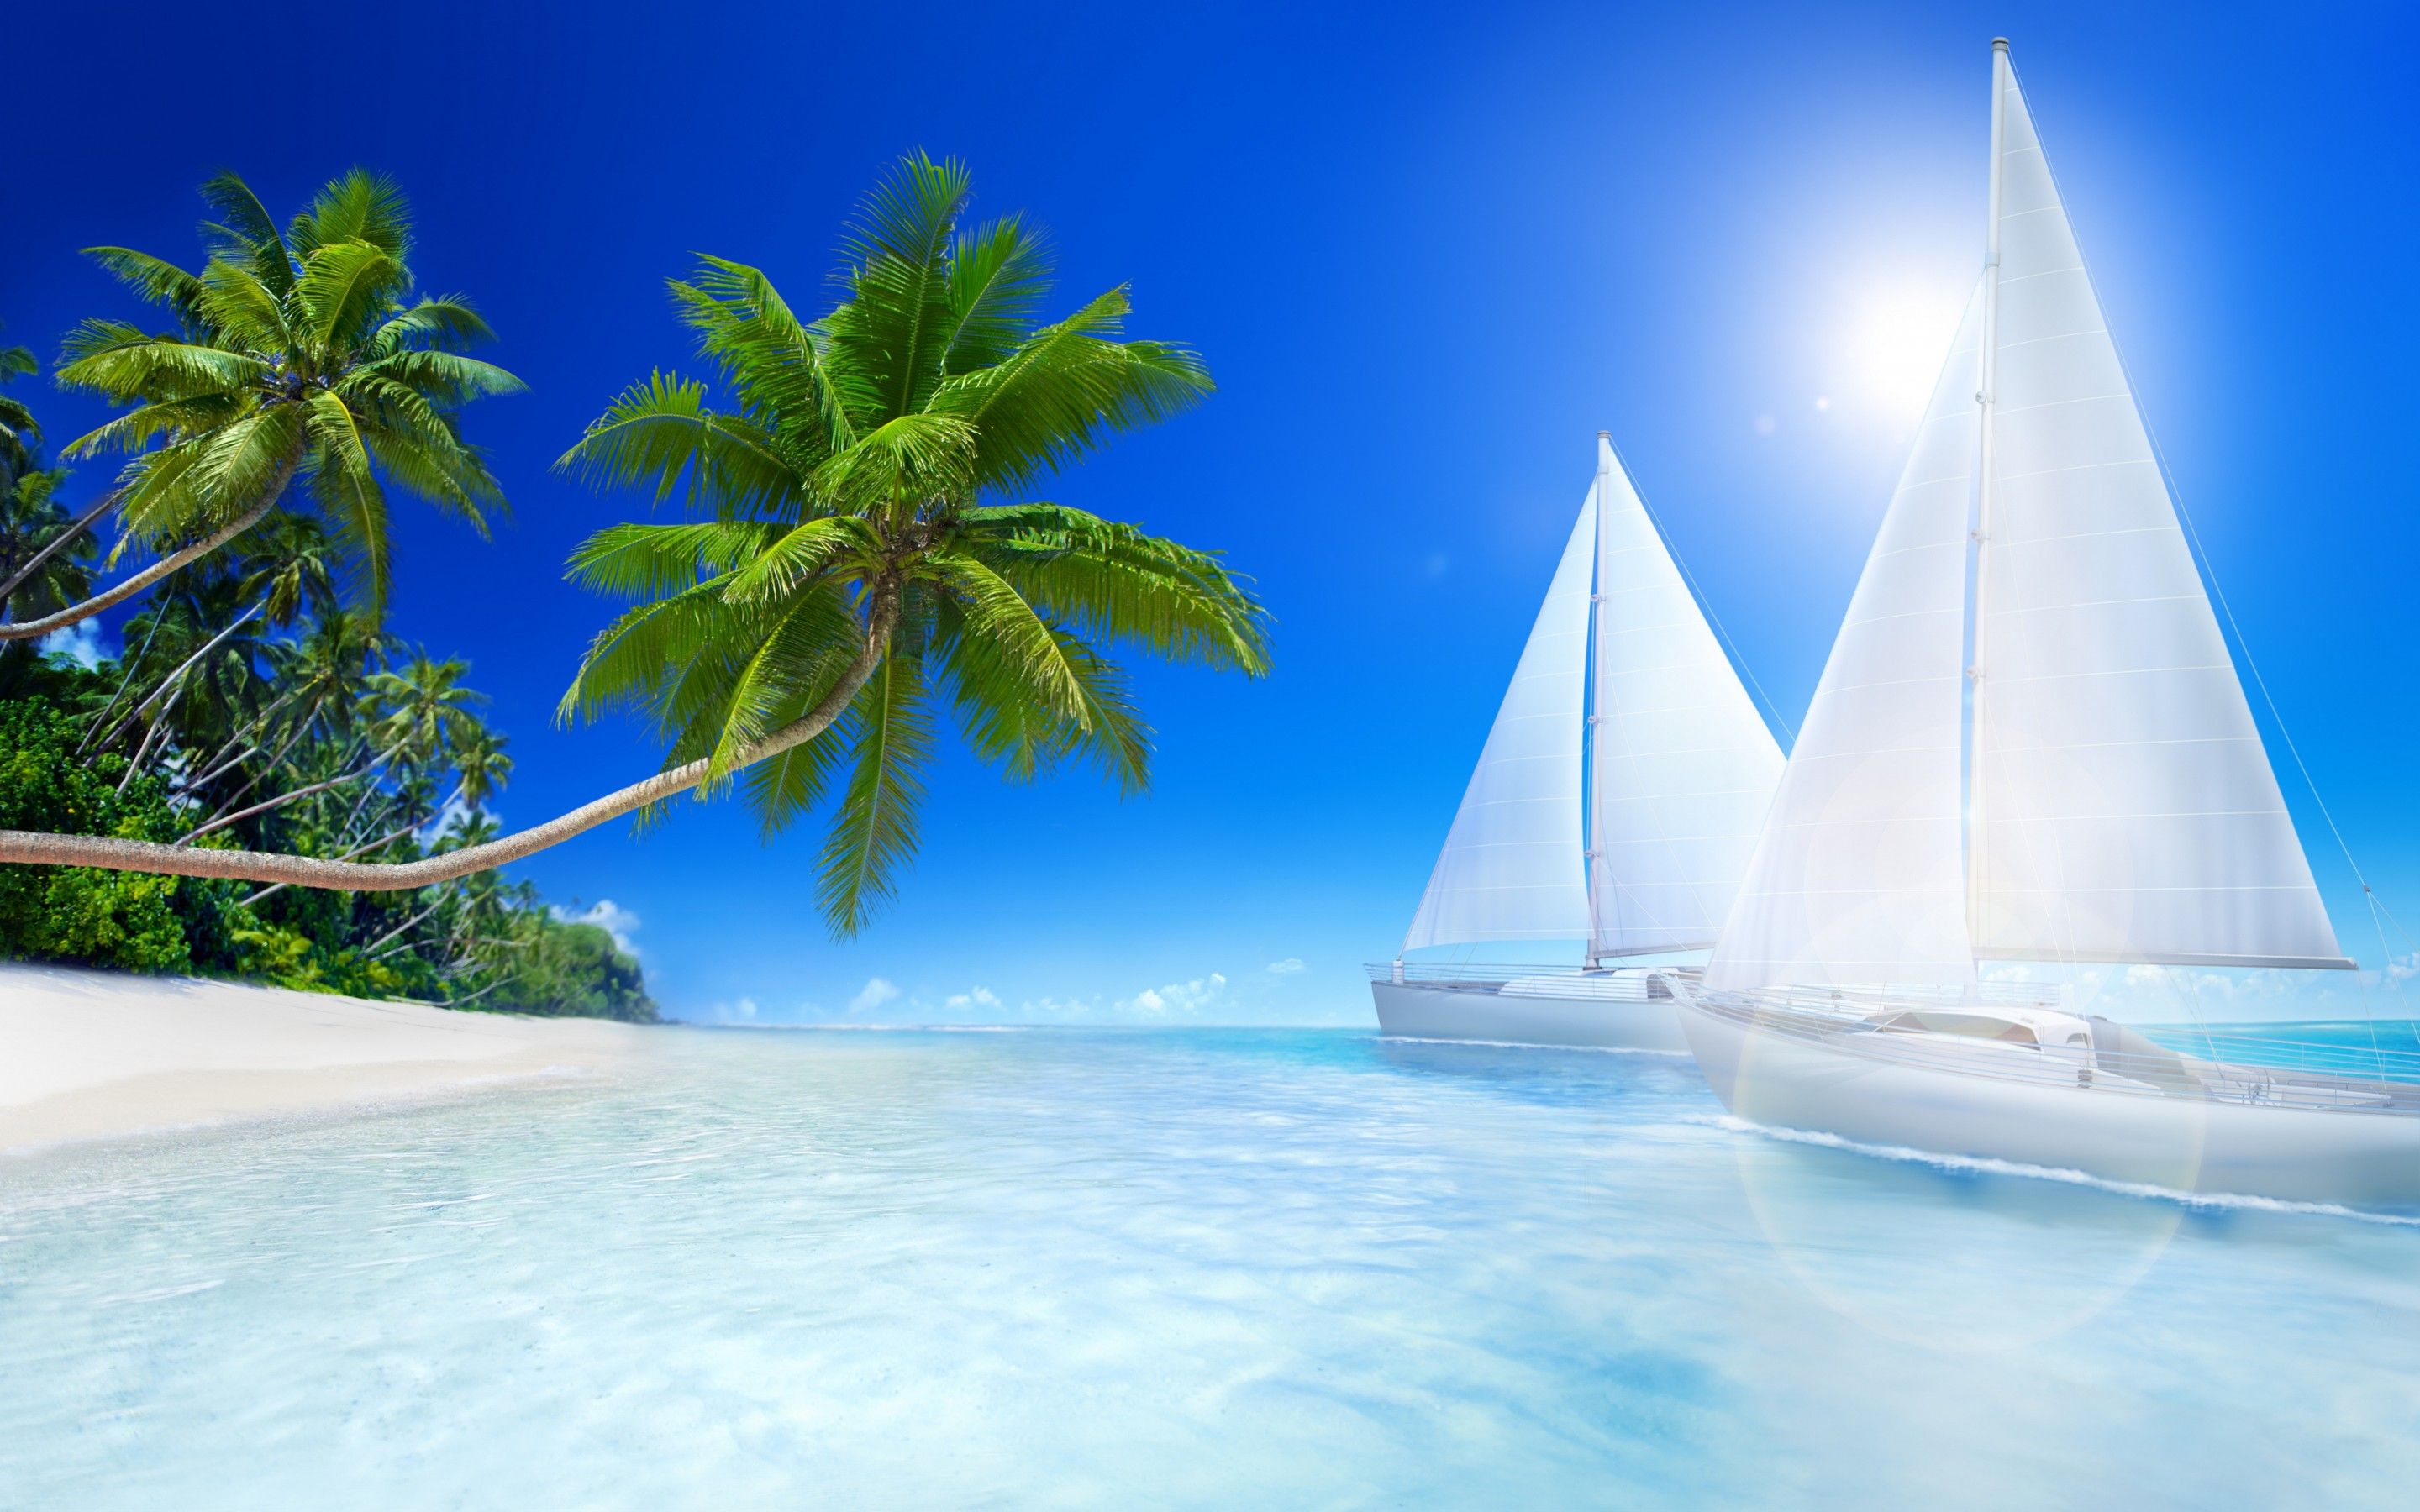 Beach Wallpaper Free Download 12001 - HD Wallpapers Site